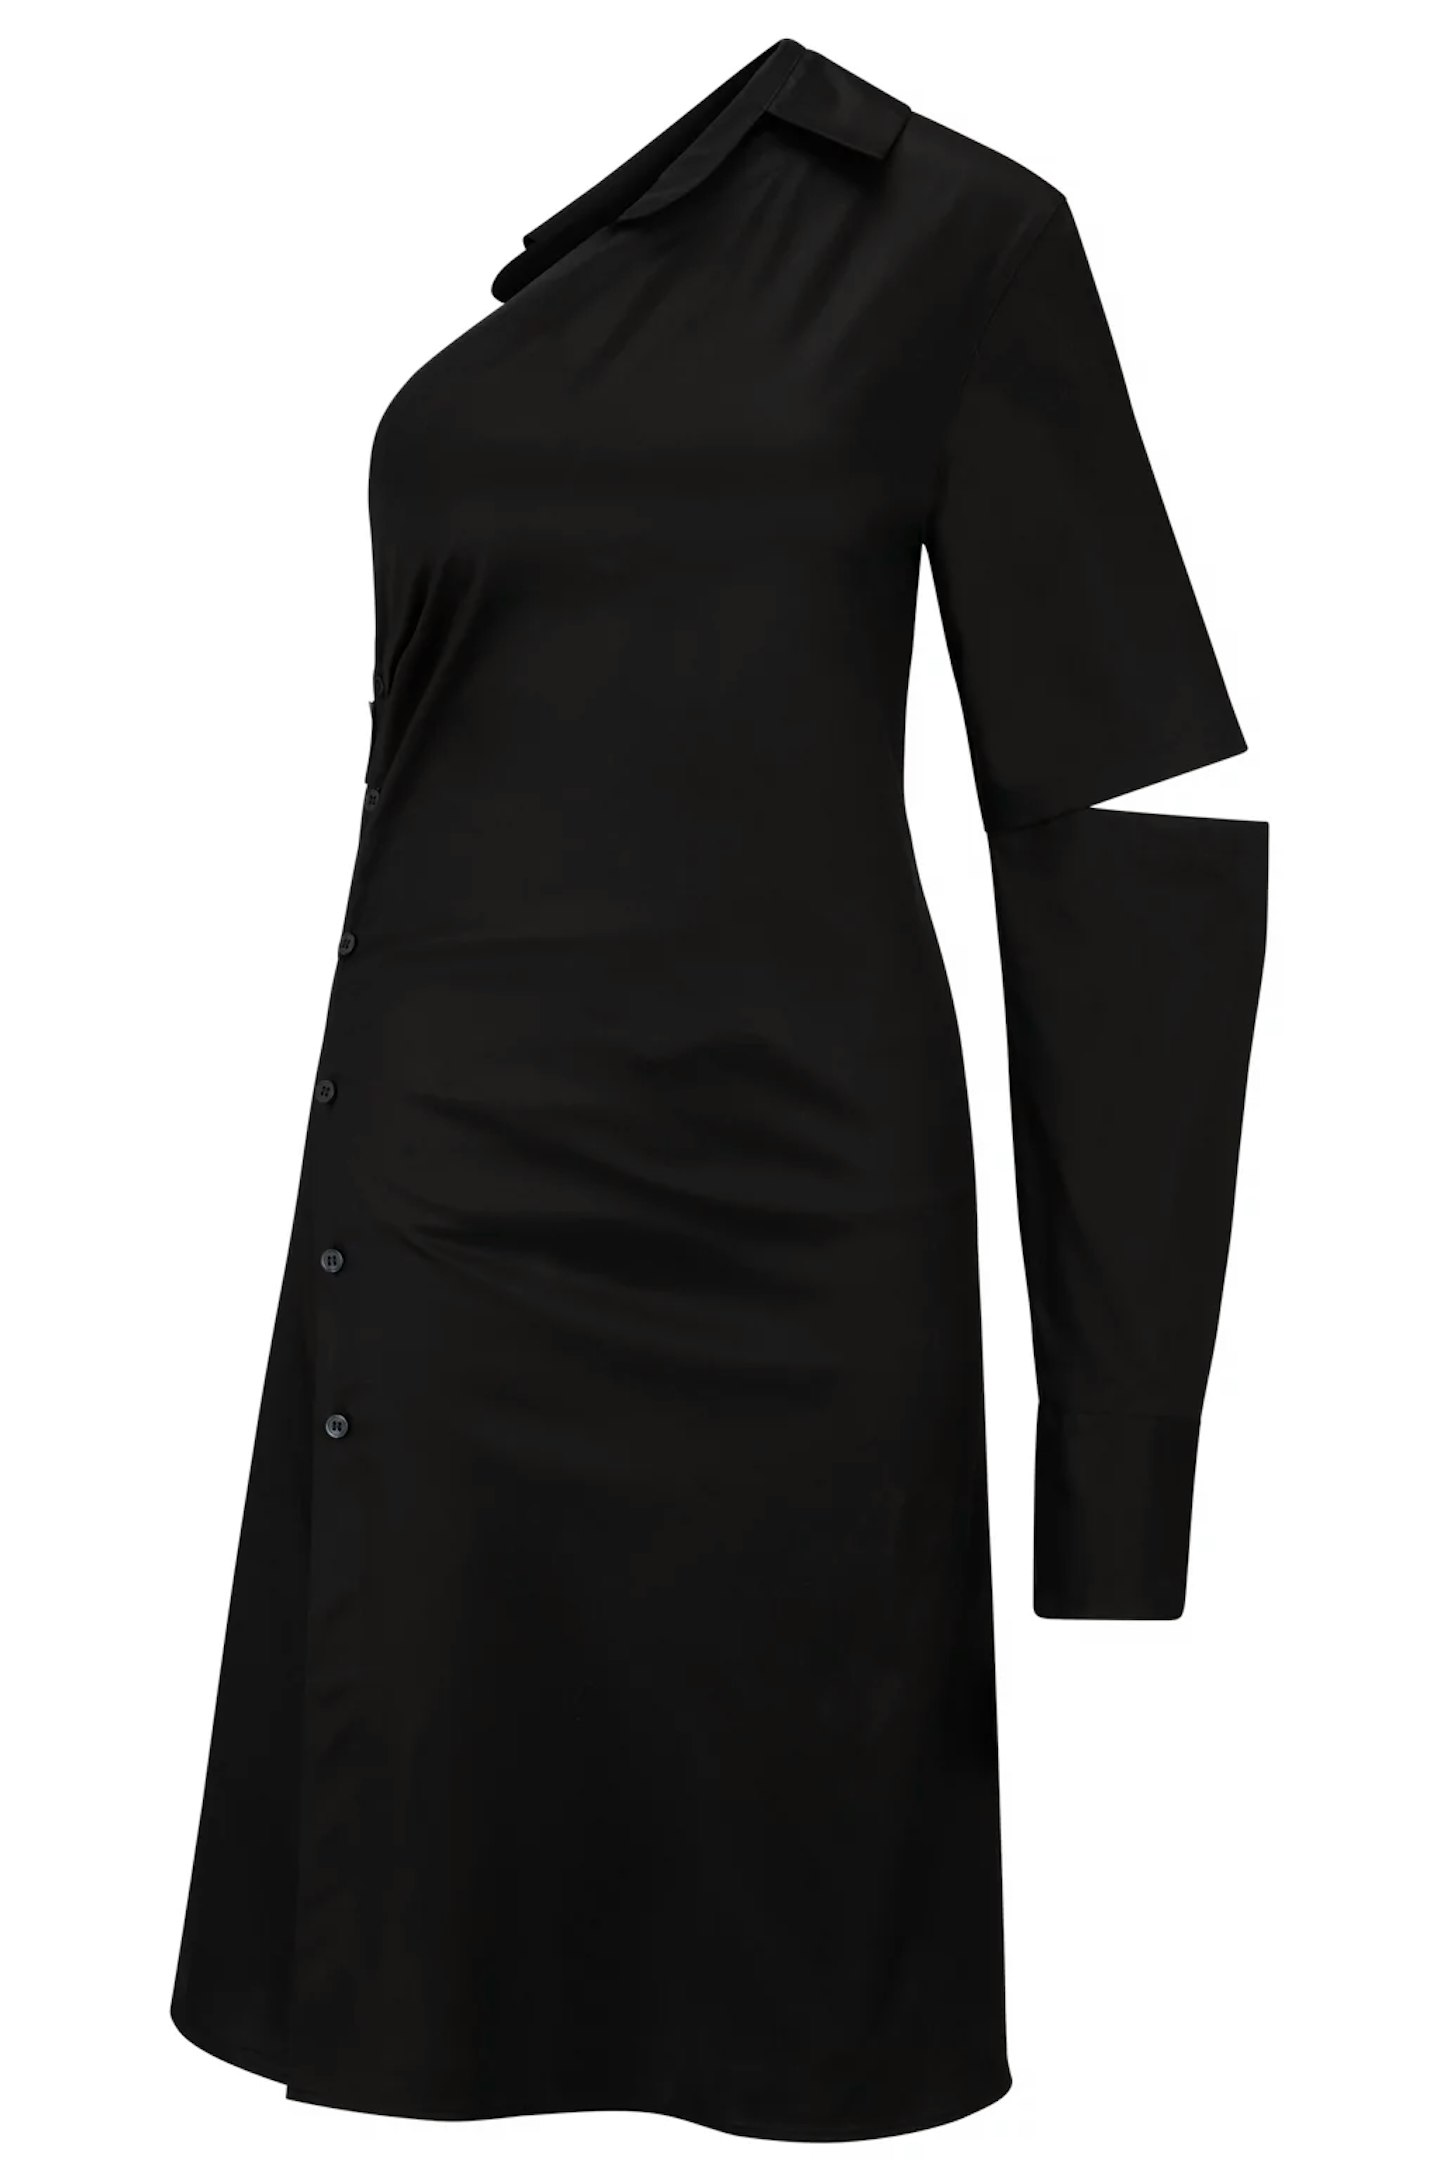 One-Shoulder Shirt Dress in Cotton, £489 at BOSS